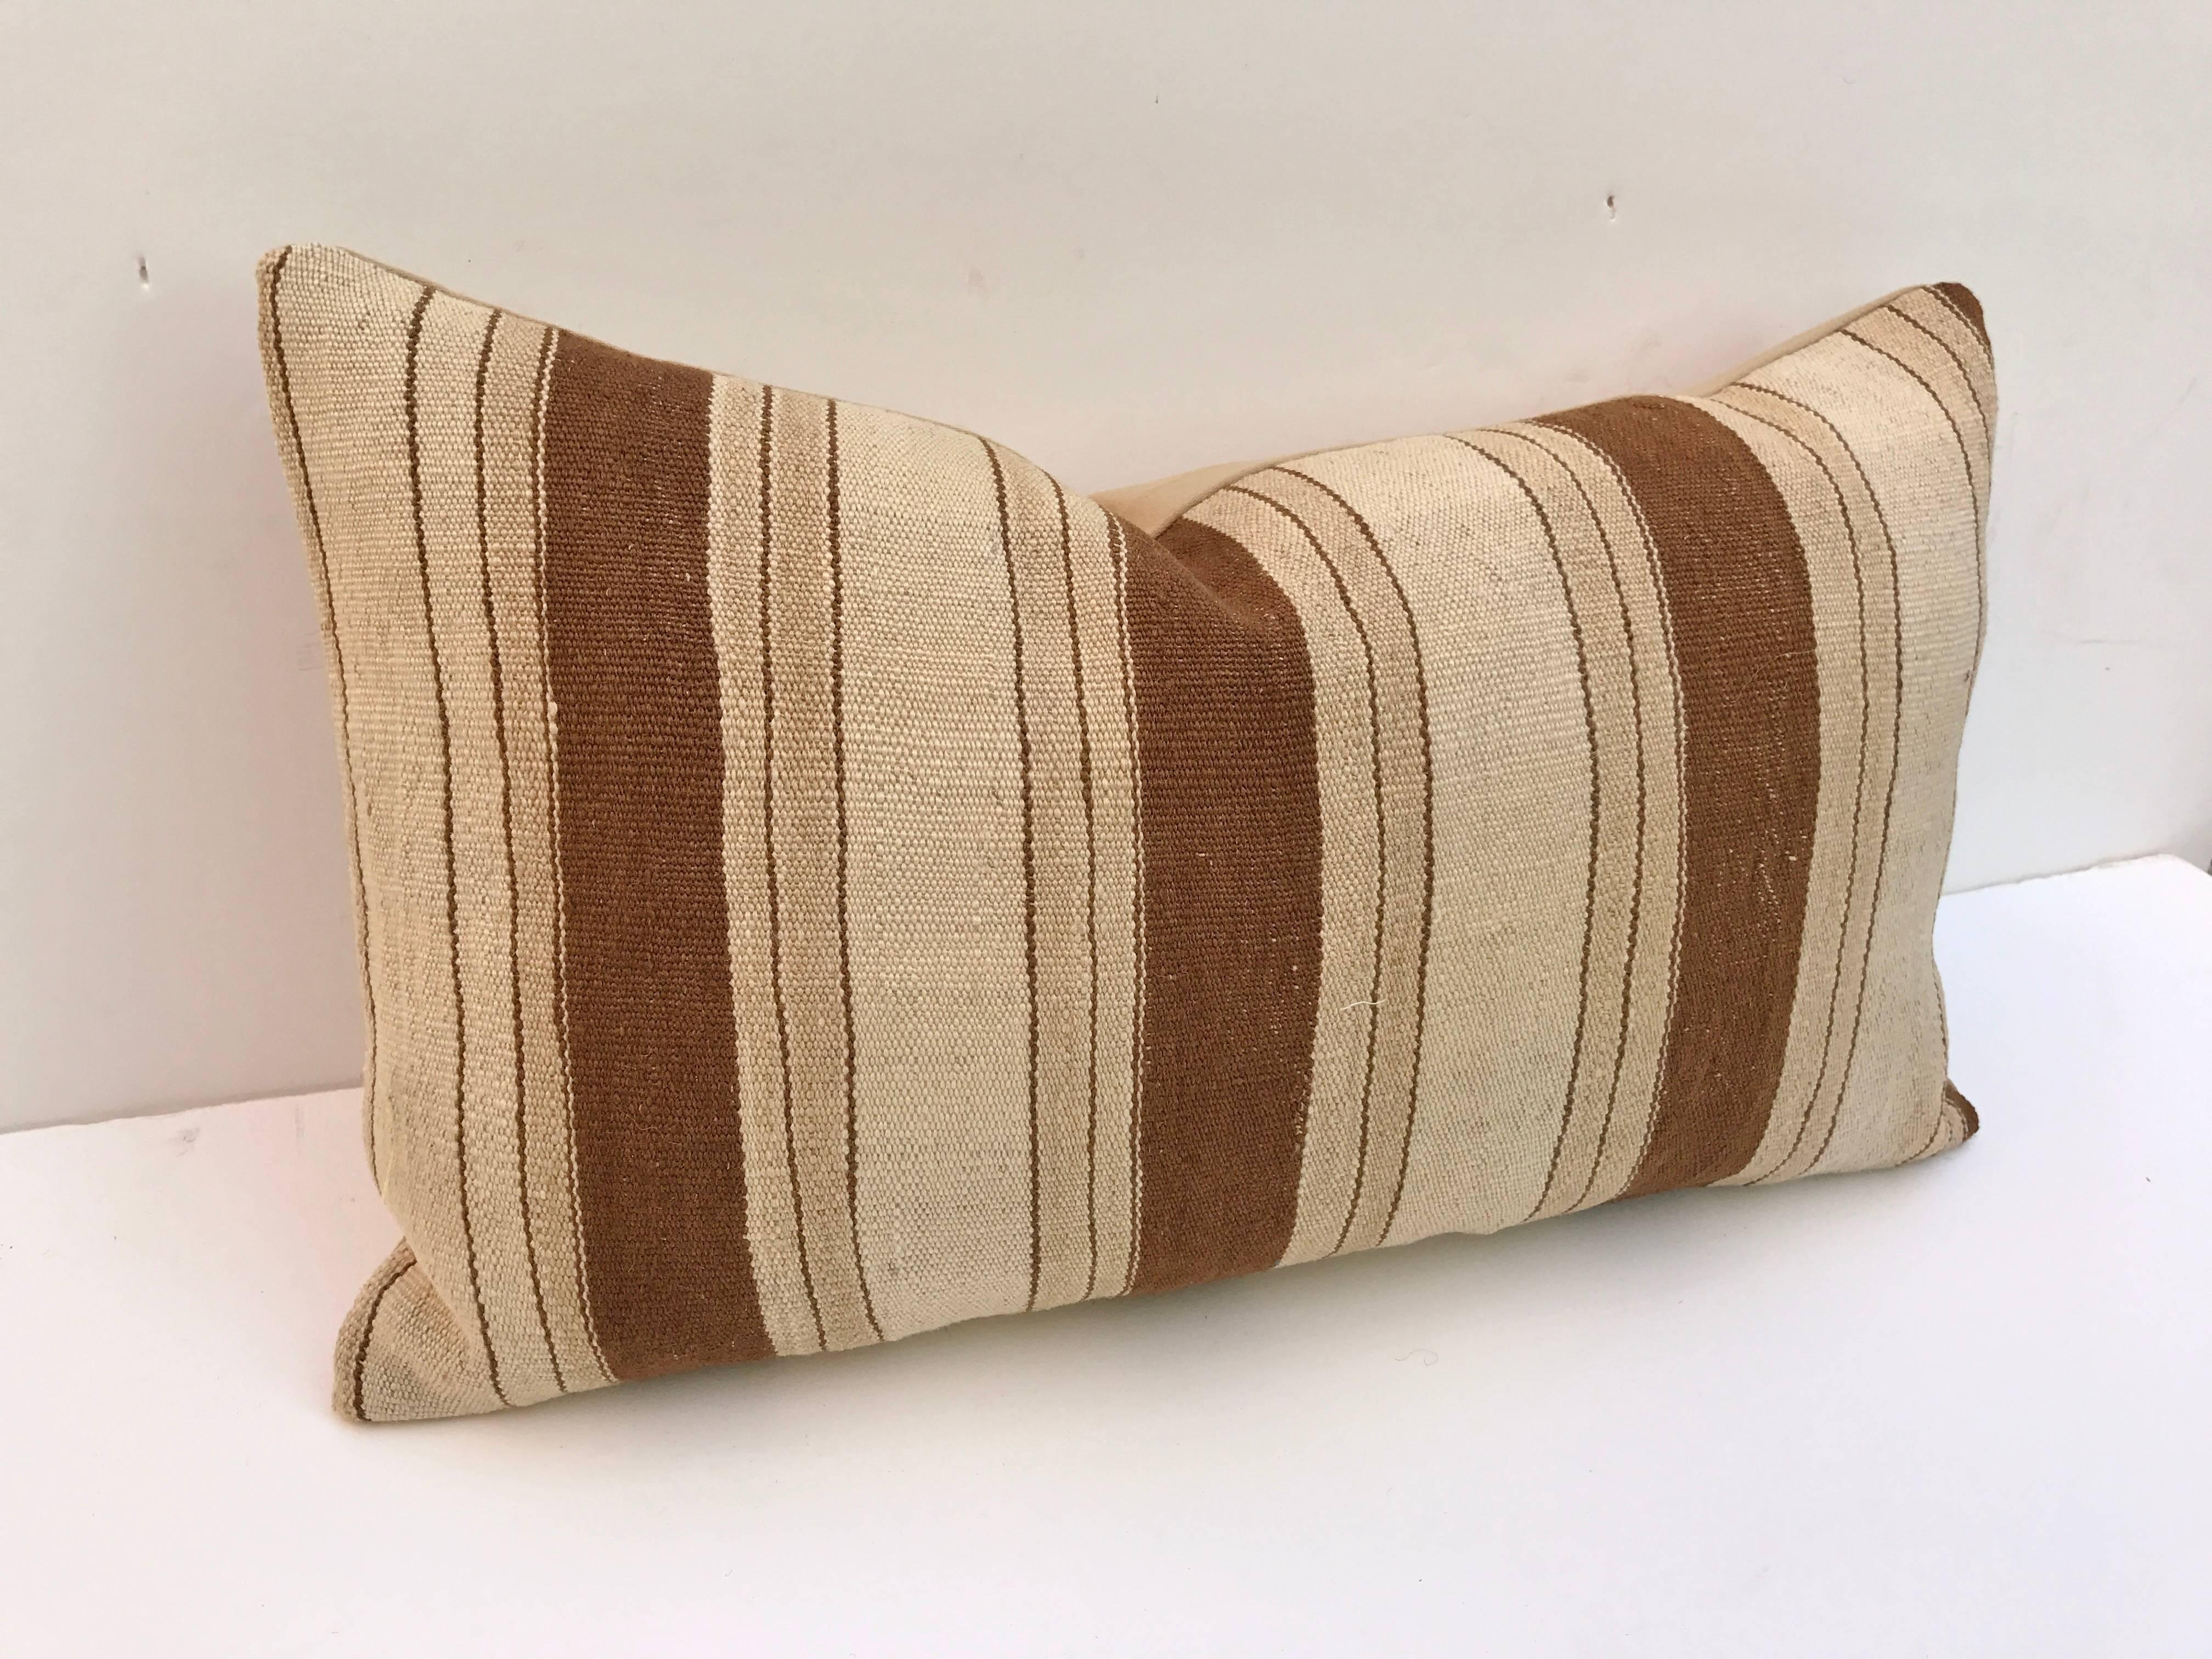 Custom pillow cut from a vintage hand loomed wool Moroccan Berber blanket from the Atlas mountains. Wool is soft and lustrous with natural colors. Pillow is backed in a wool blend, filled with an insert of 50/50 down and feathers and hand-sewn